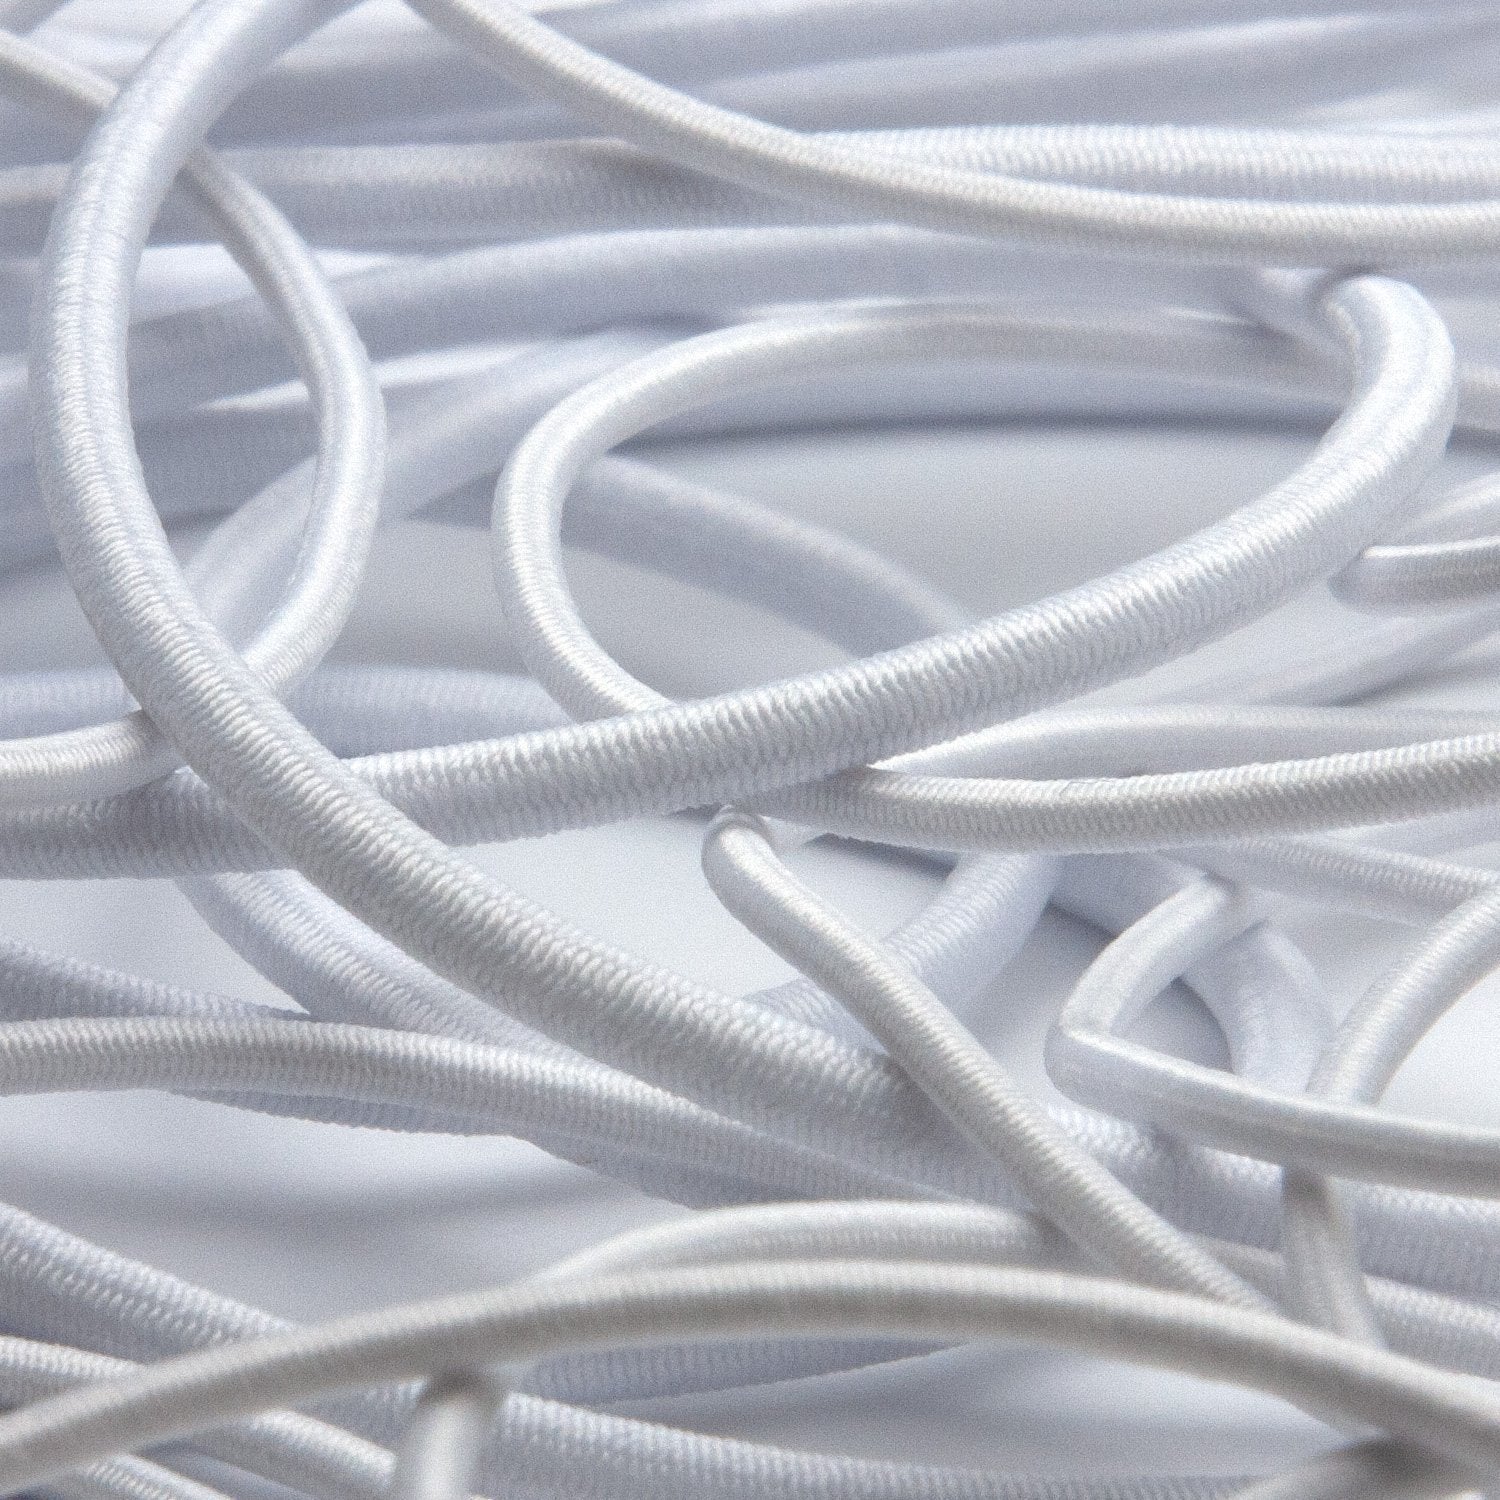 Elastic cord manufacturer and distributor